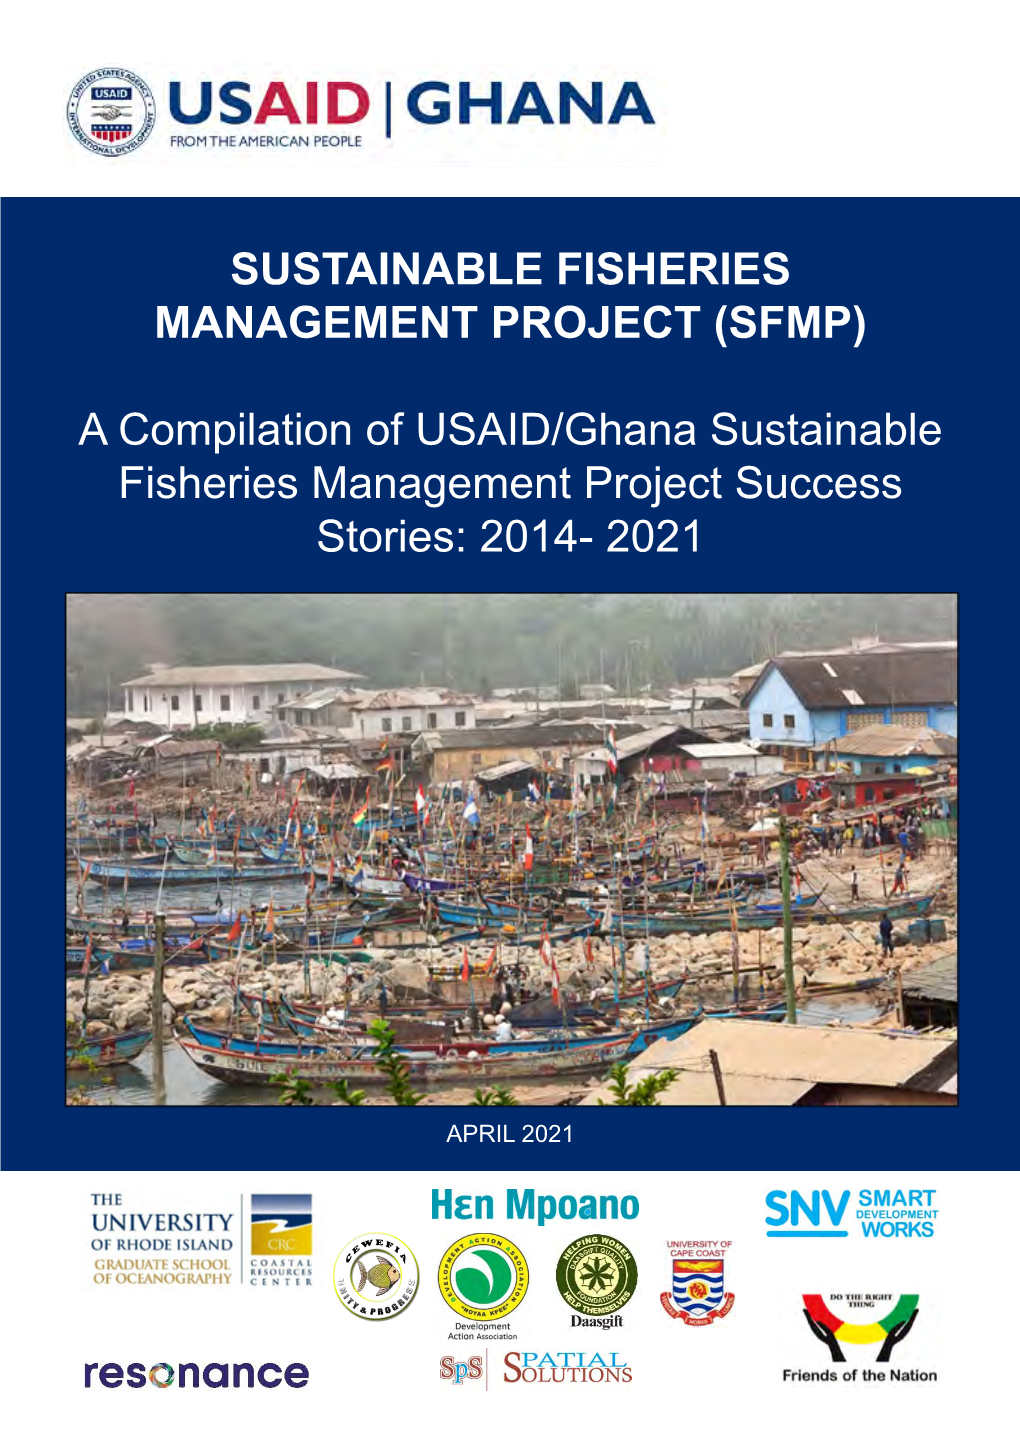 A Compilation of USAID/Ghana Sustainable Fisheries Management Project Success Stories: 2014- 2021